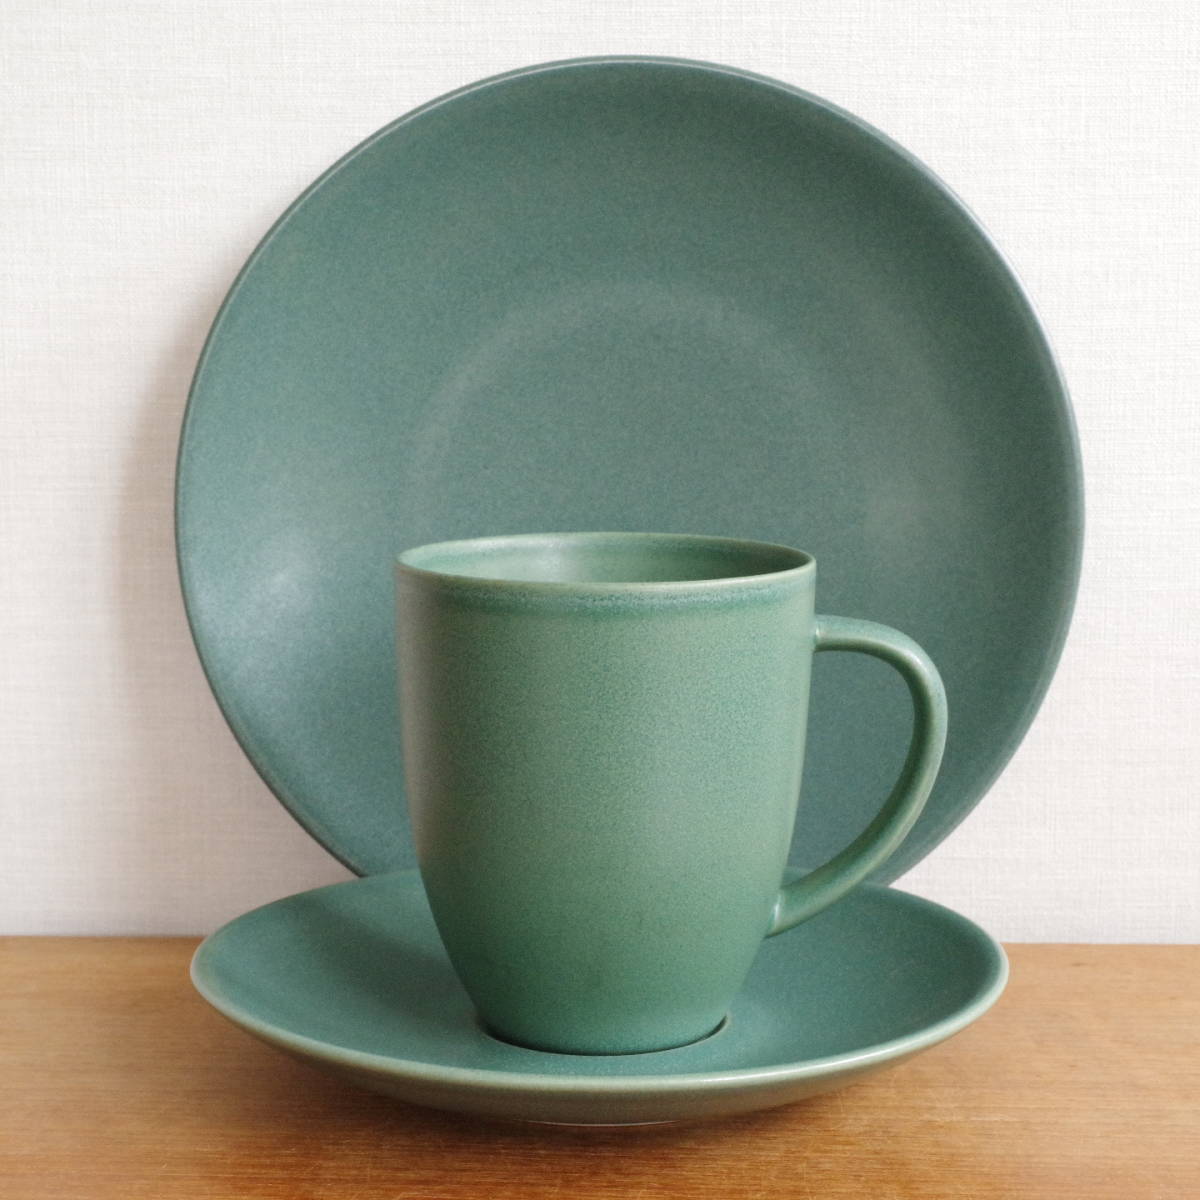 Read more about the article Vintage Arabia 24H Mug Cup Plate Trio Set Light Green Morning